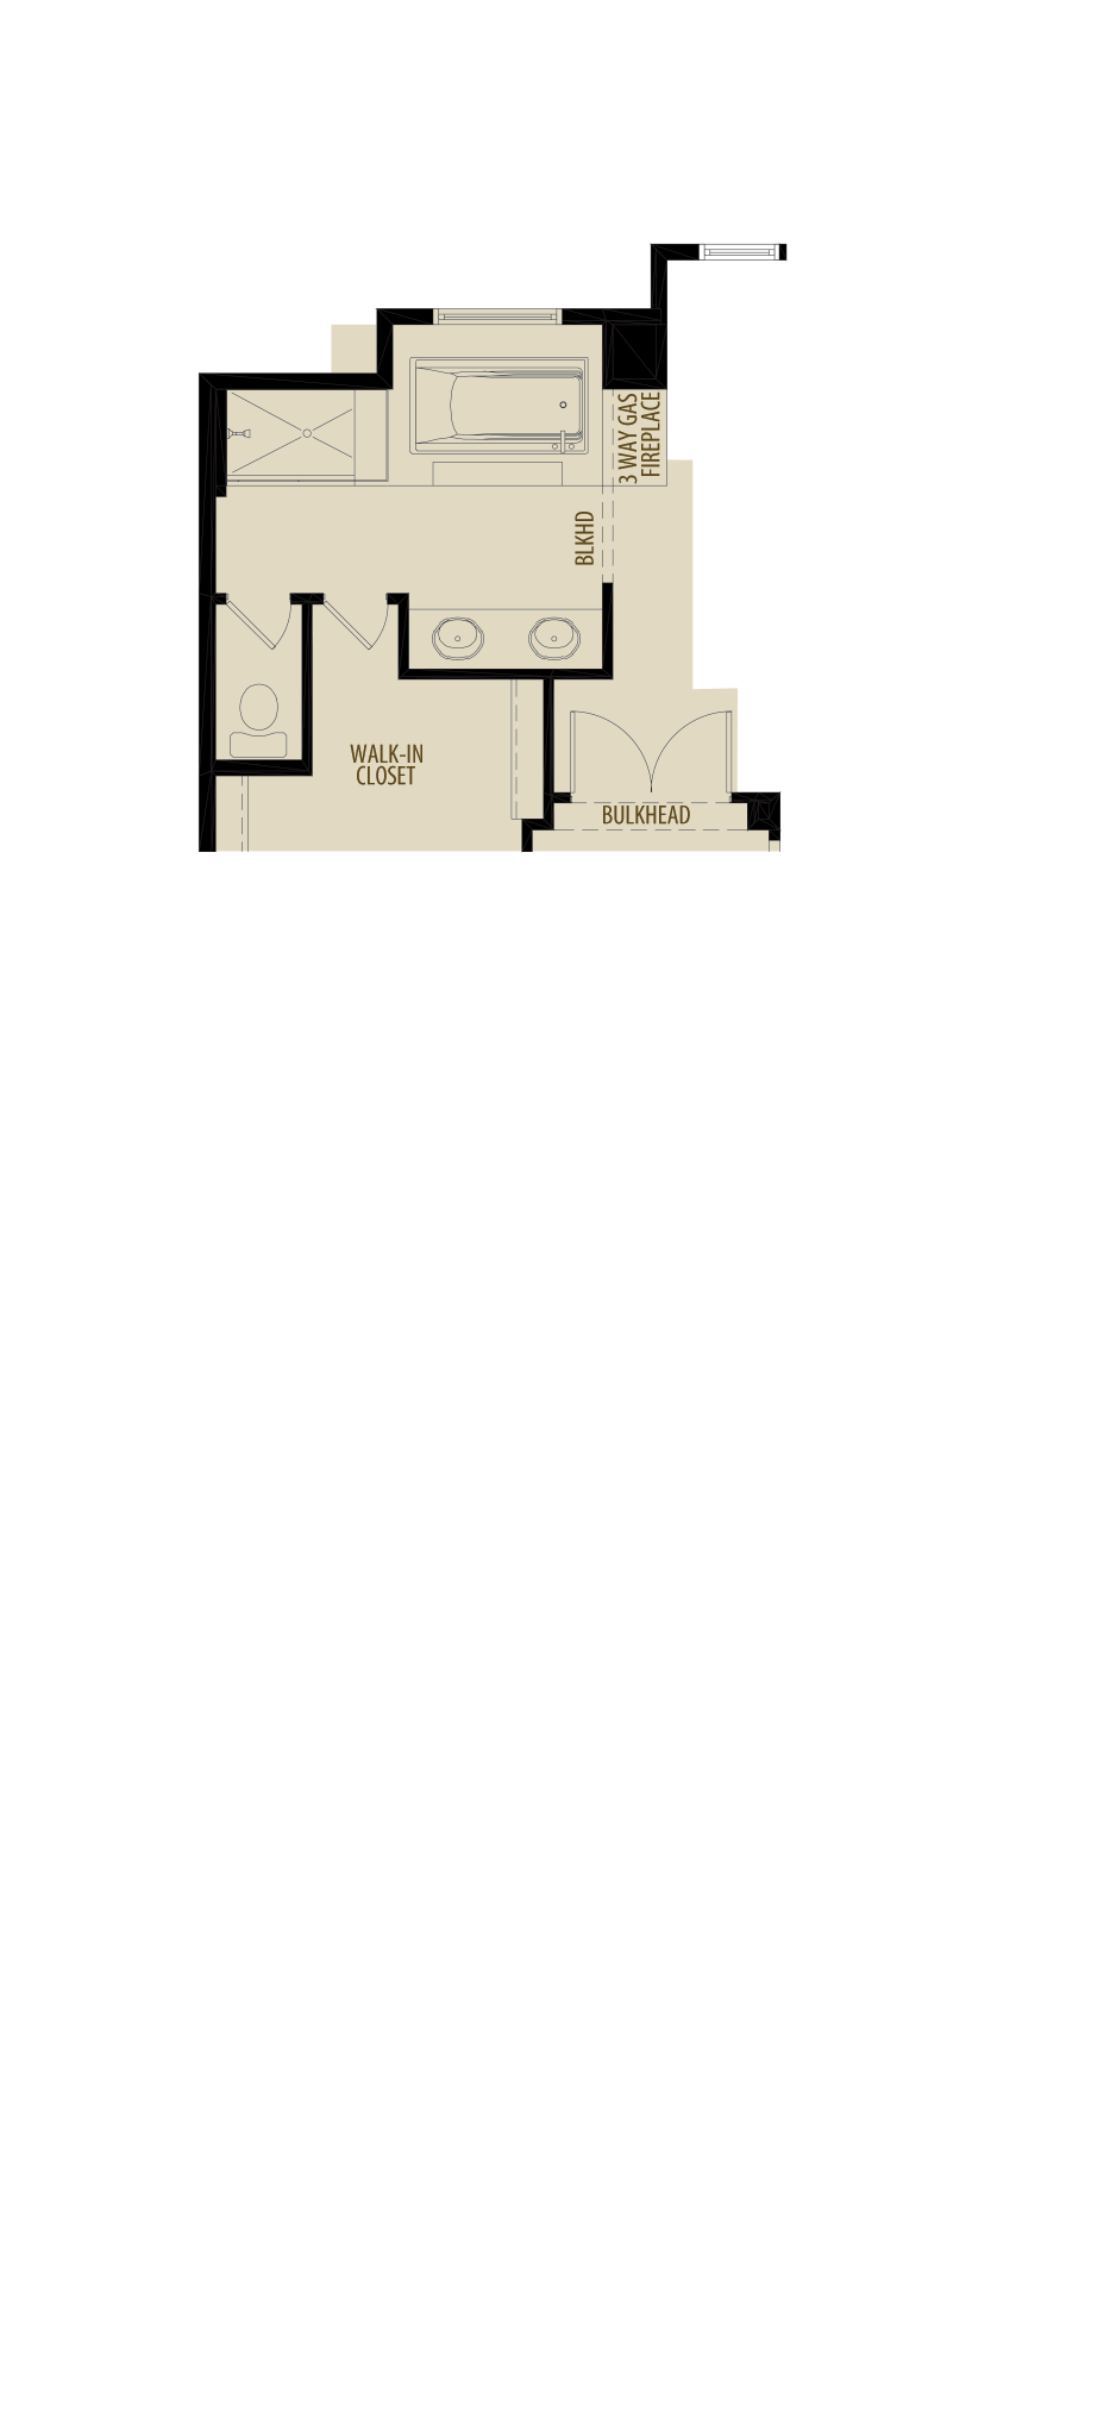 Revised Ensuite Layout Adds 8Sq Ft